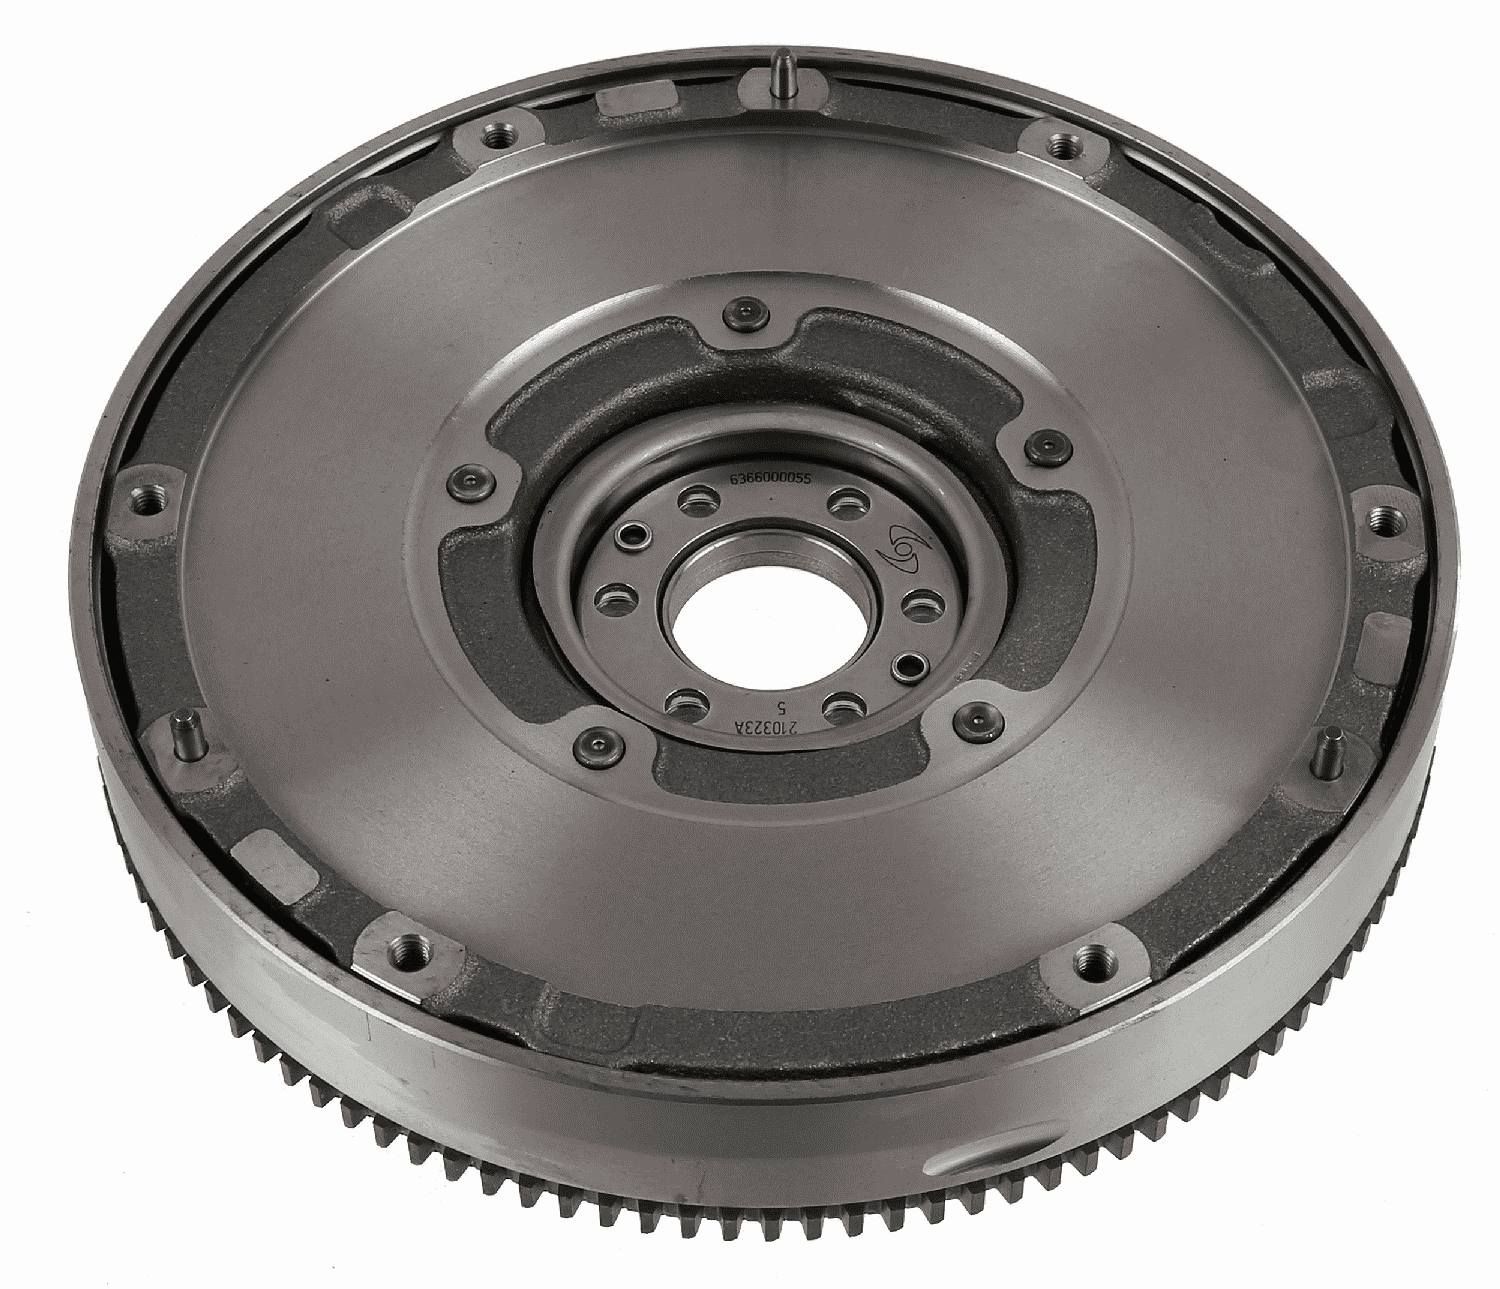 Clutch flywheel 6366 000 055 Ford FOCUS 2020 – buy replacement parts